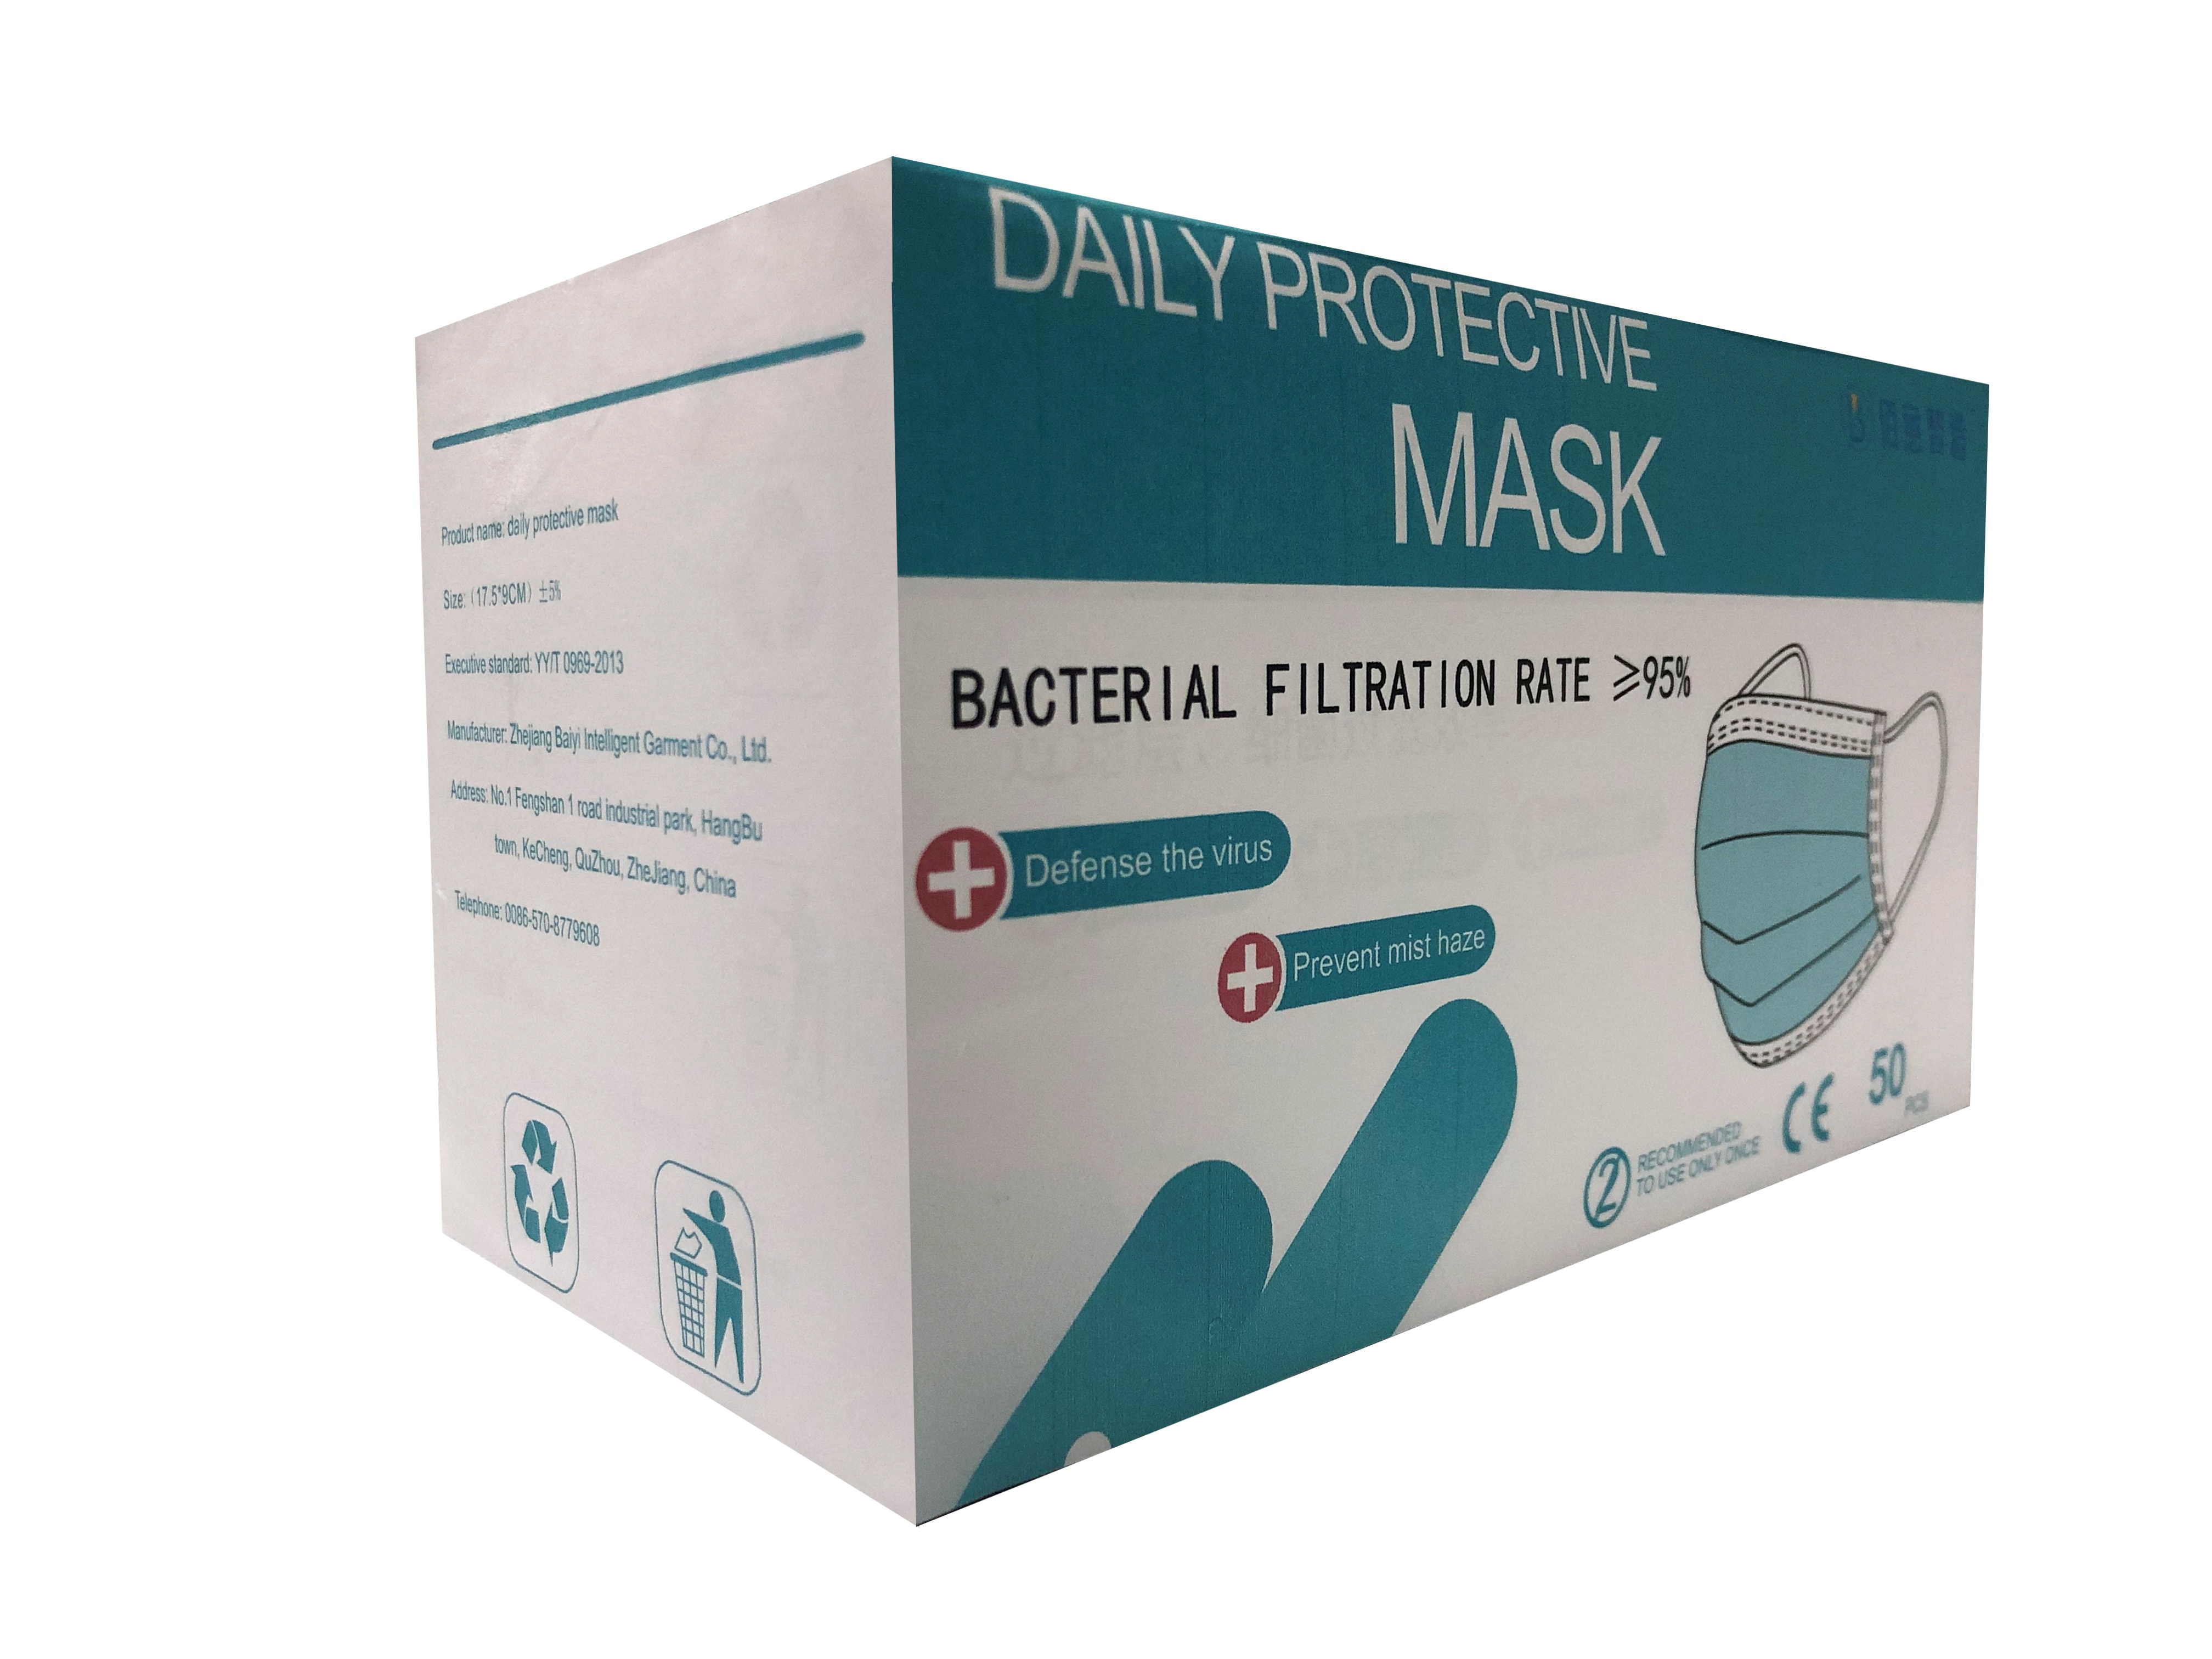 2020 Hot Sale Disposable Face Mask Cheap Price Disposable 3 Layer